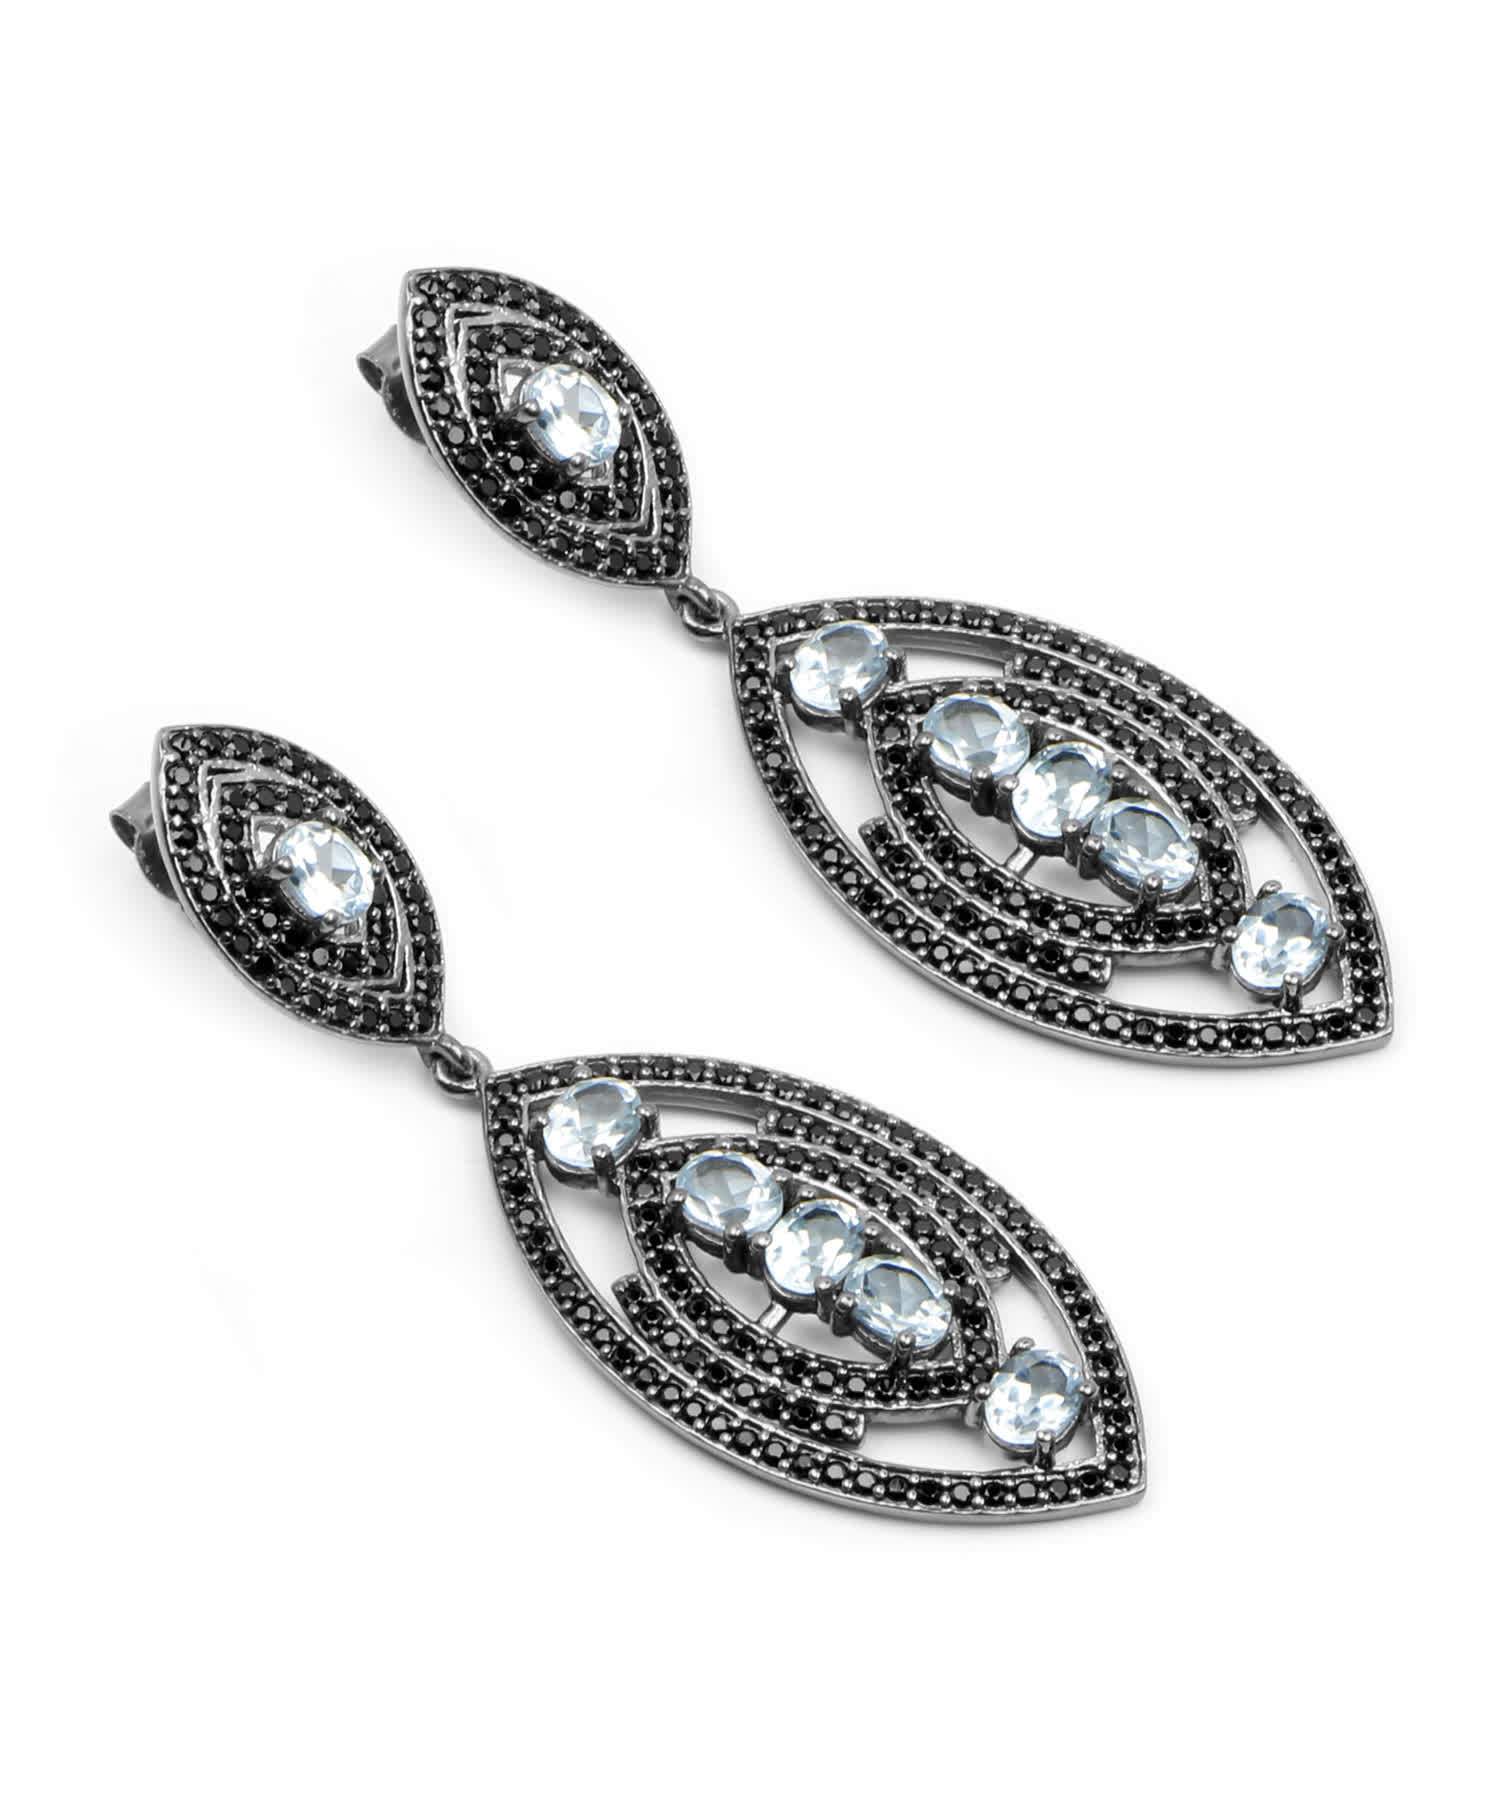 8.80ctw Natural Sky Blue Topaz and Black Spinel Rhodium Plated 925 Sterling Silver Antique Style Dangle Earrings View 3